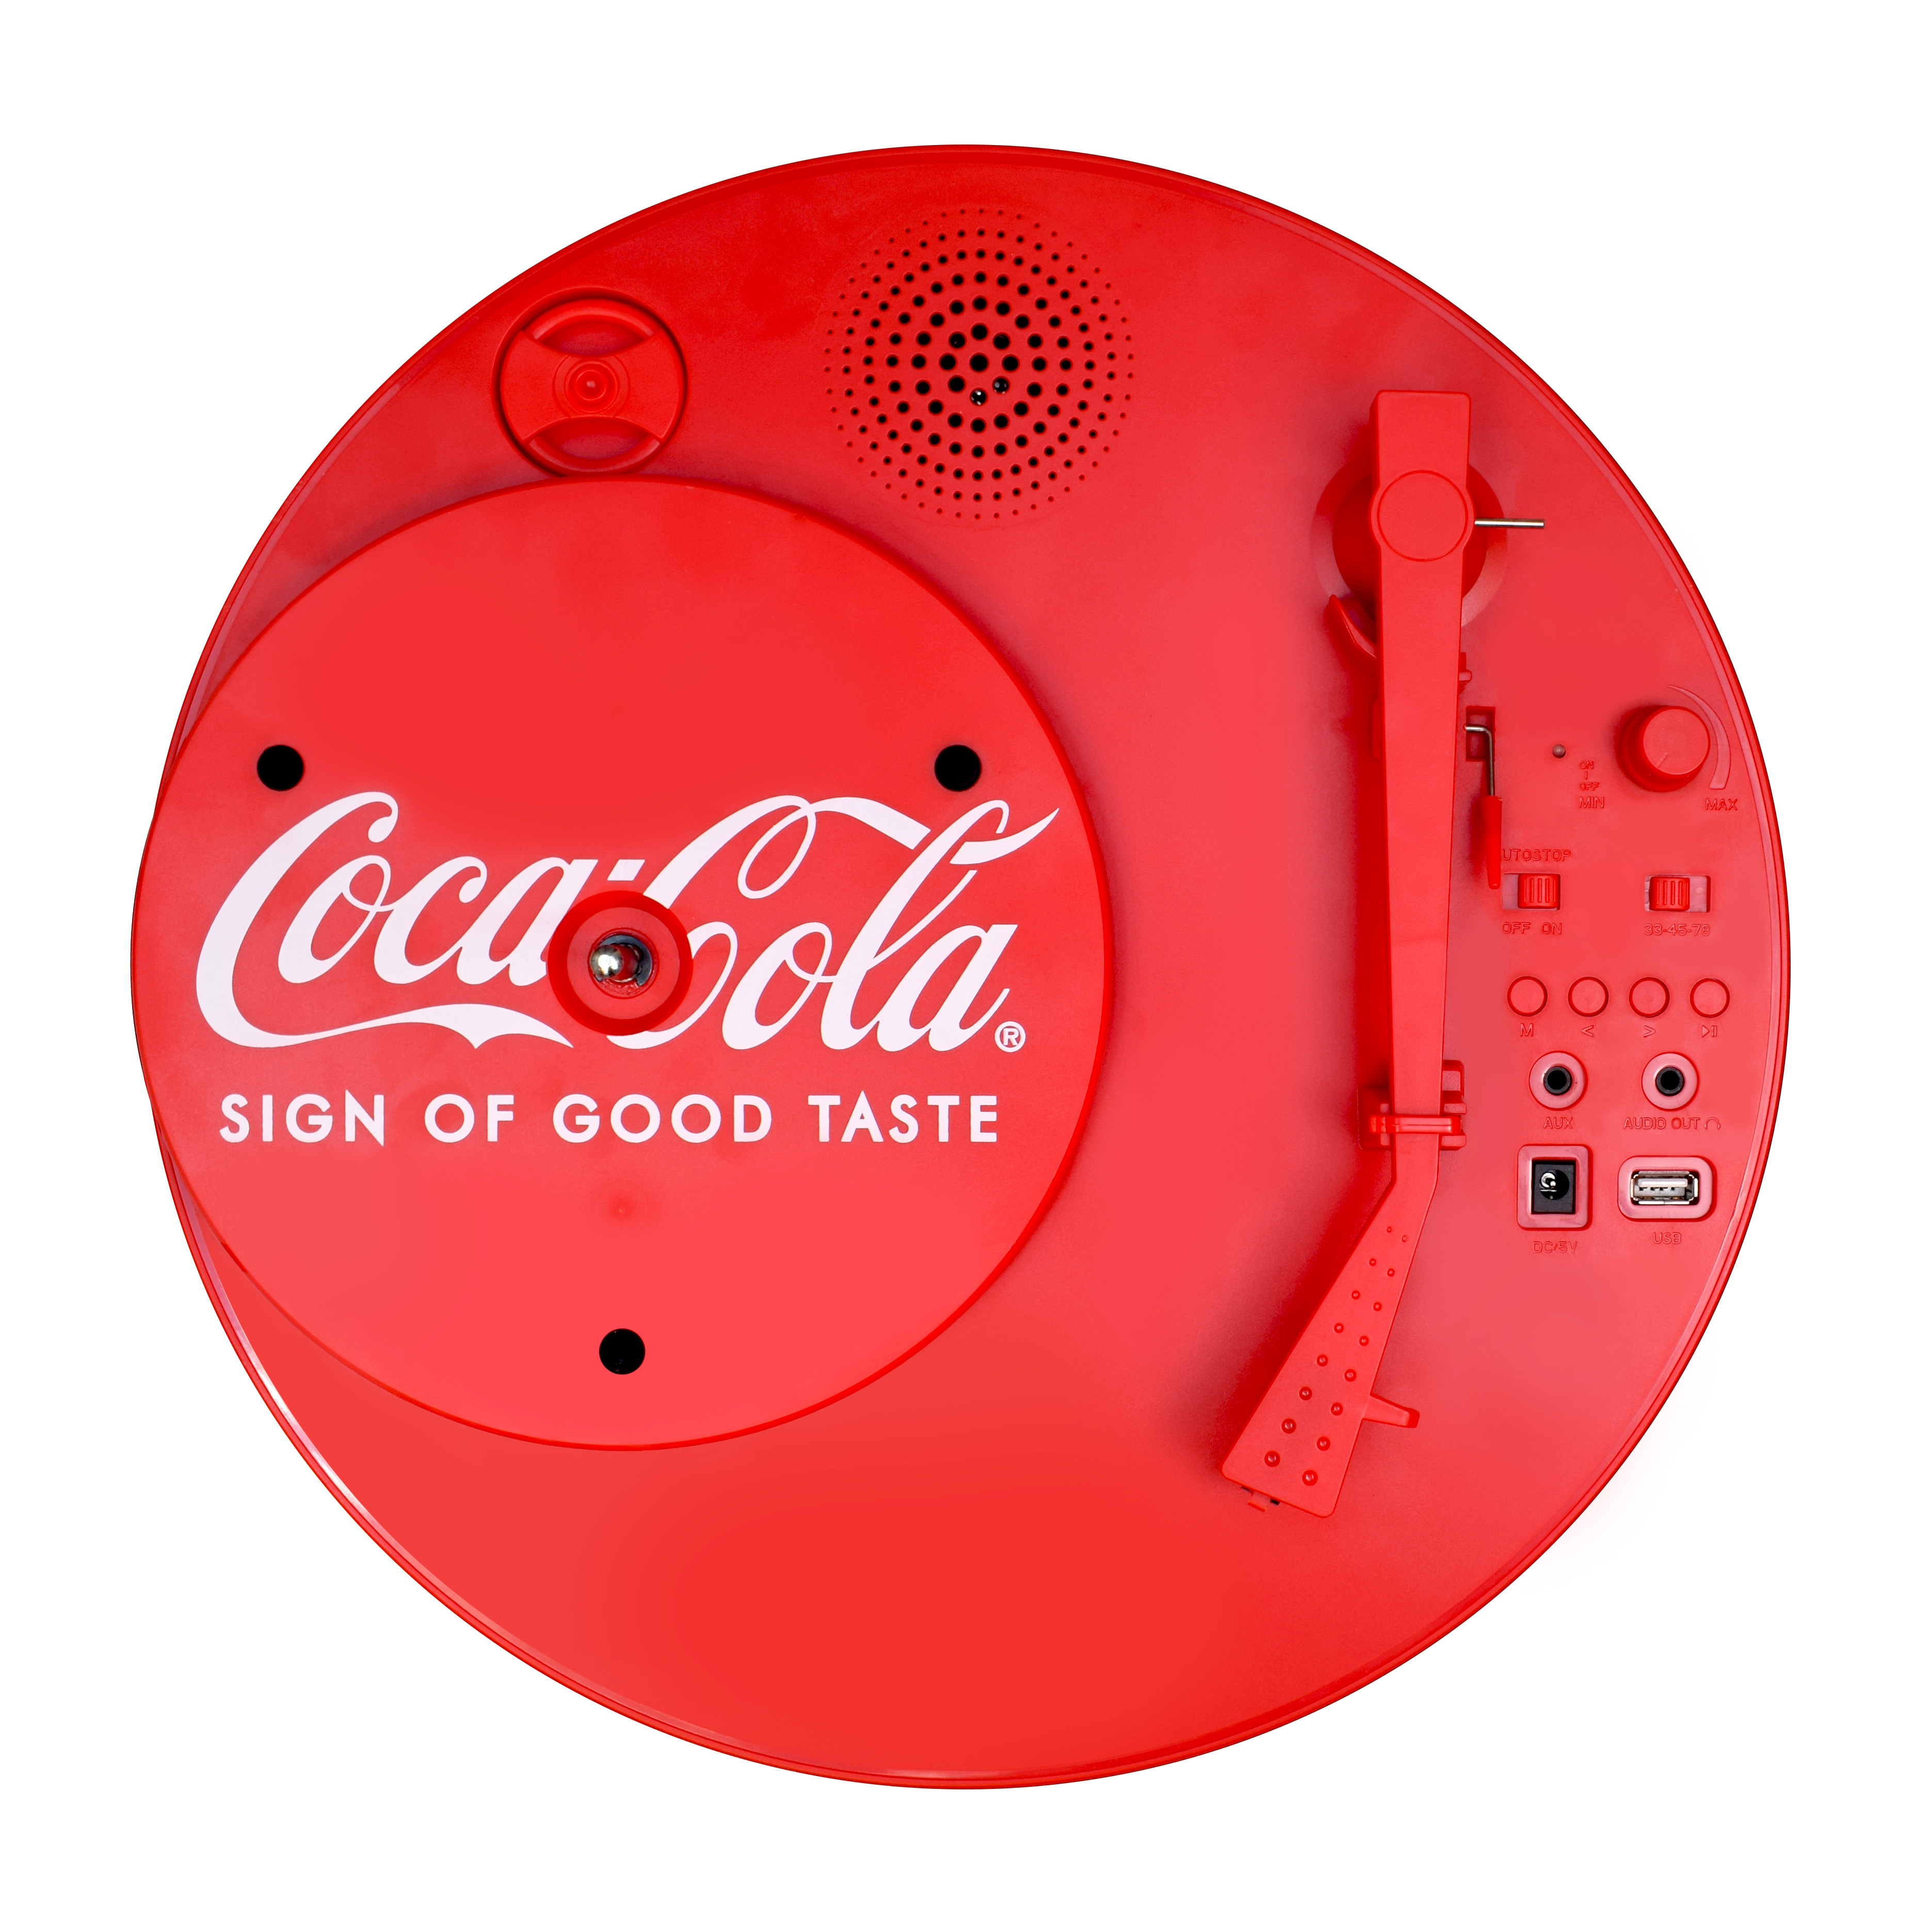 Coca Cola Retro Turntable with Wireless Speaker, 3 Different Playback Modes, 33S, 45S, 78S Playback Support, Portable Carry Case, Vintage Radio - image 1 of 10